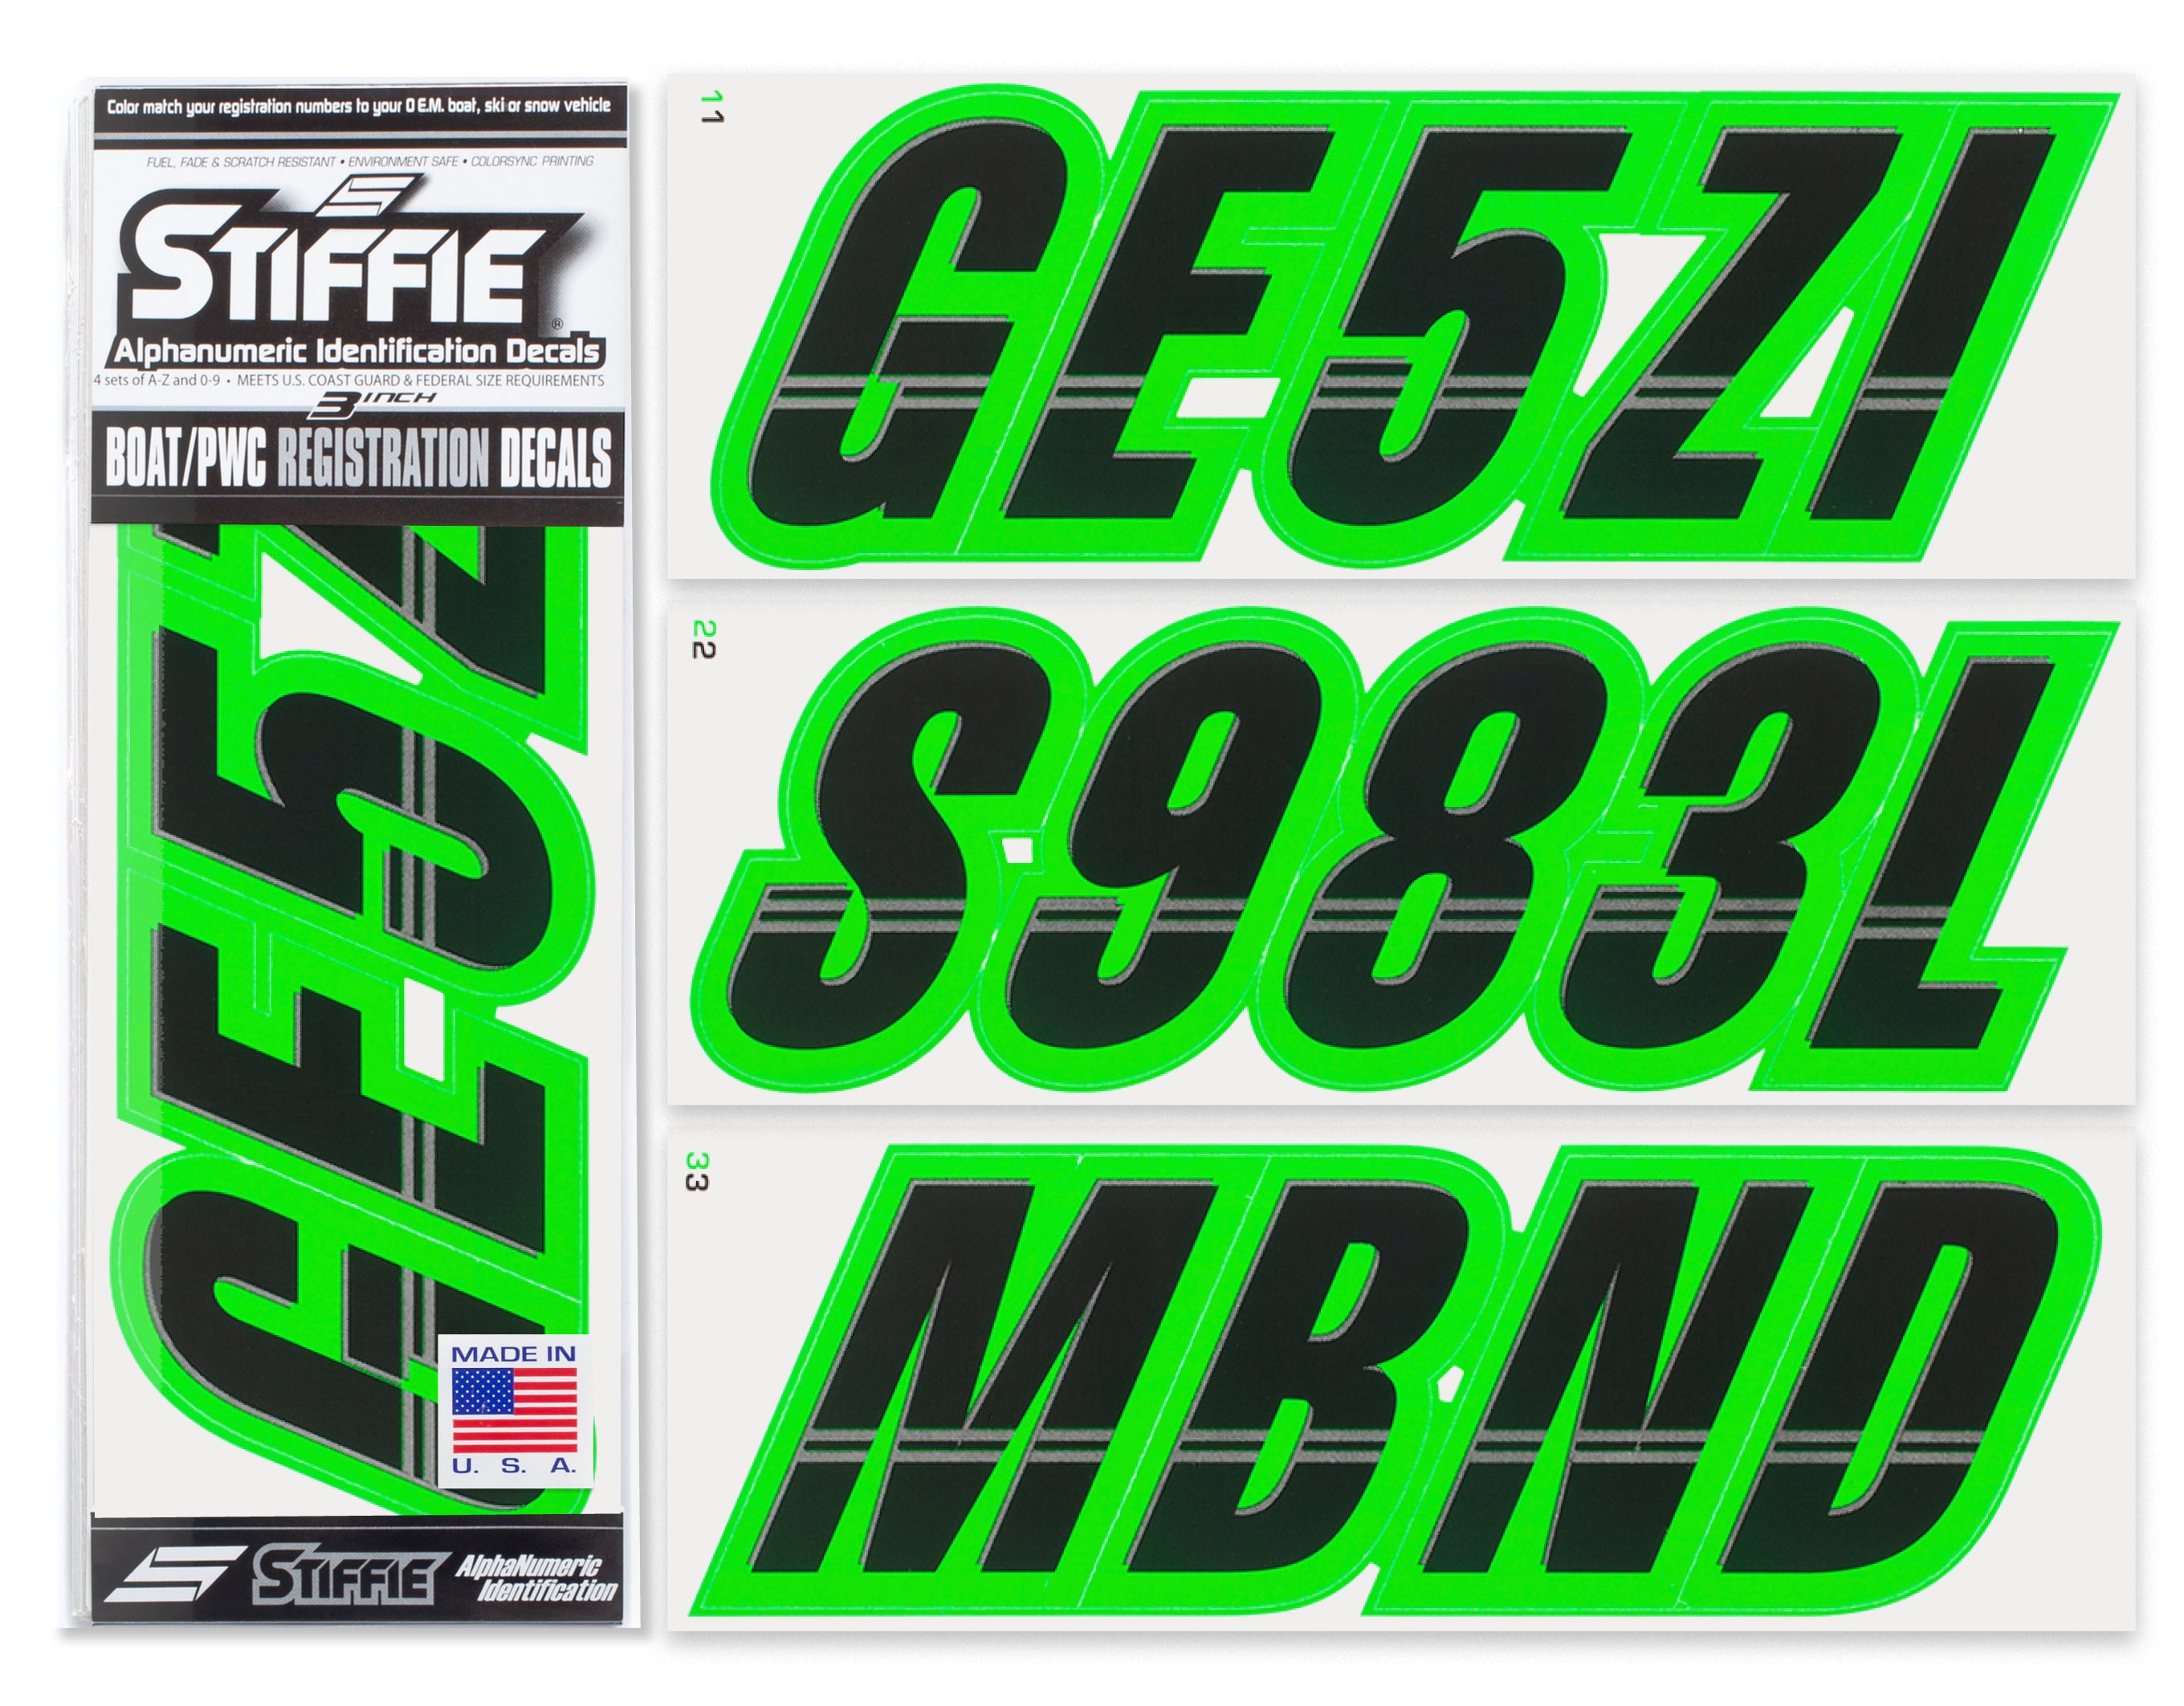 STIFFIE Techtron Black/Electric Green 3" Alpha-Numeric Registration Identification Numbers Stickers Decals for Boats & Personal Watercraft